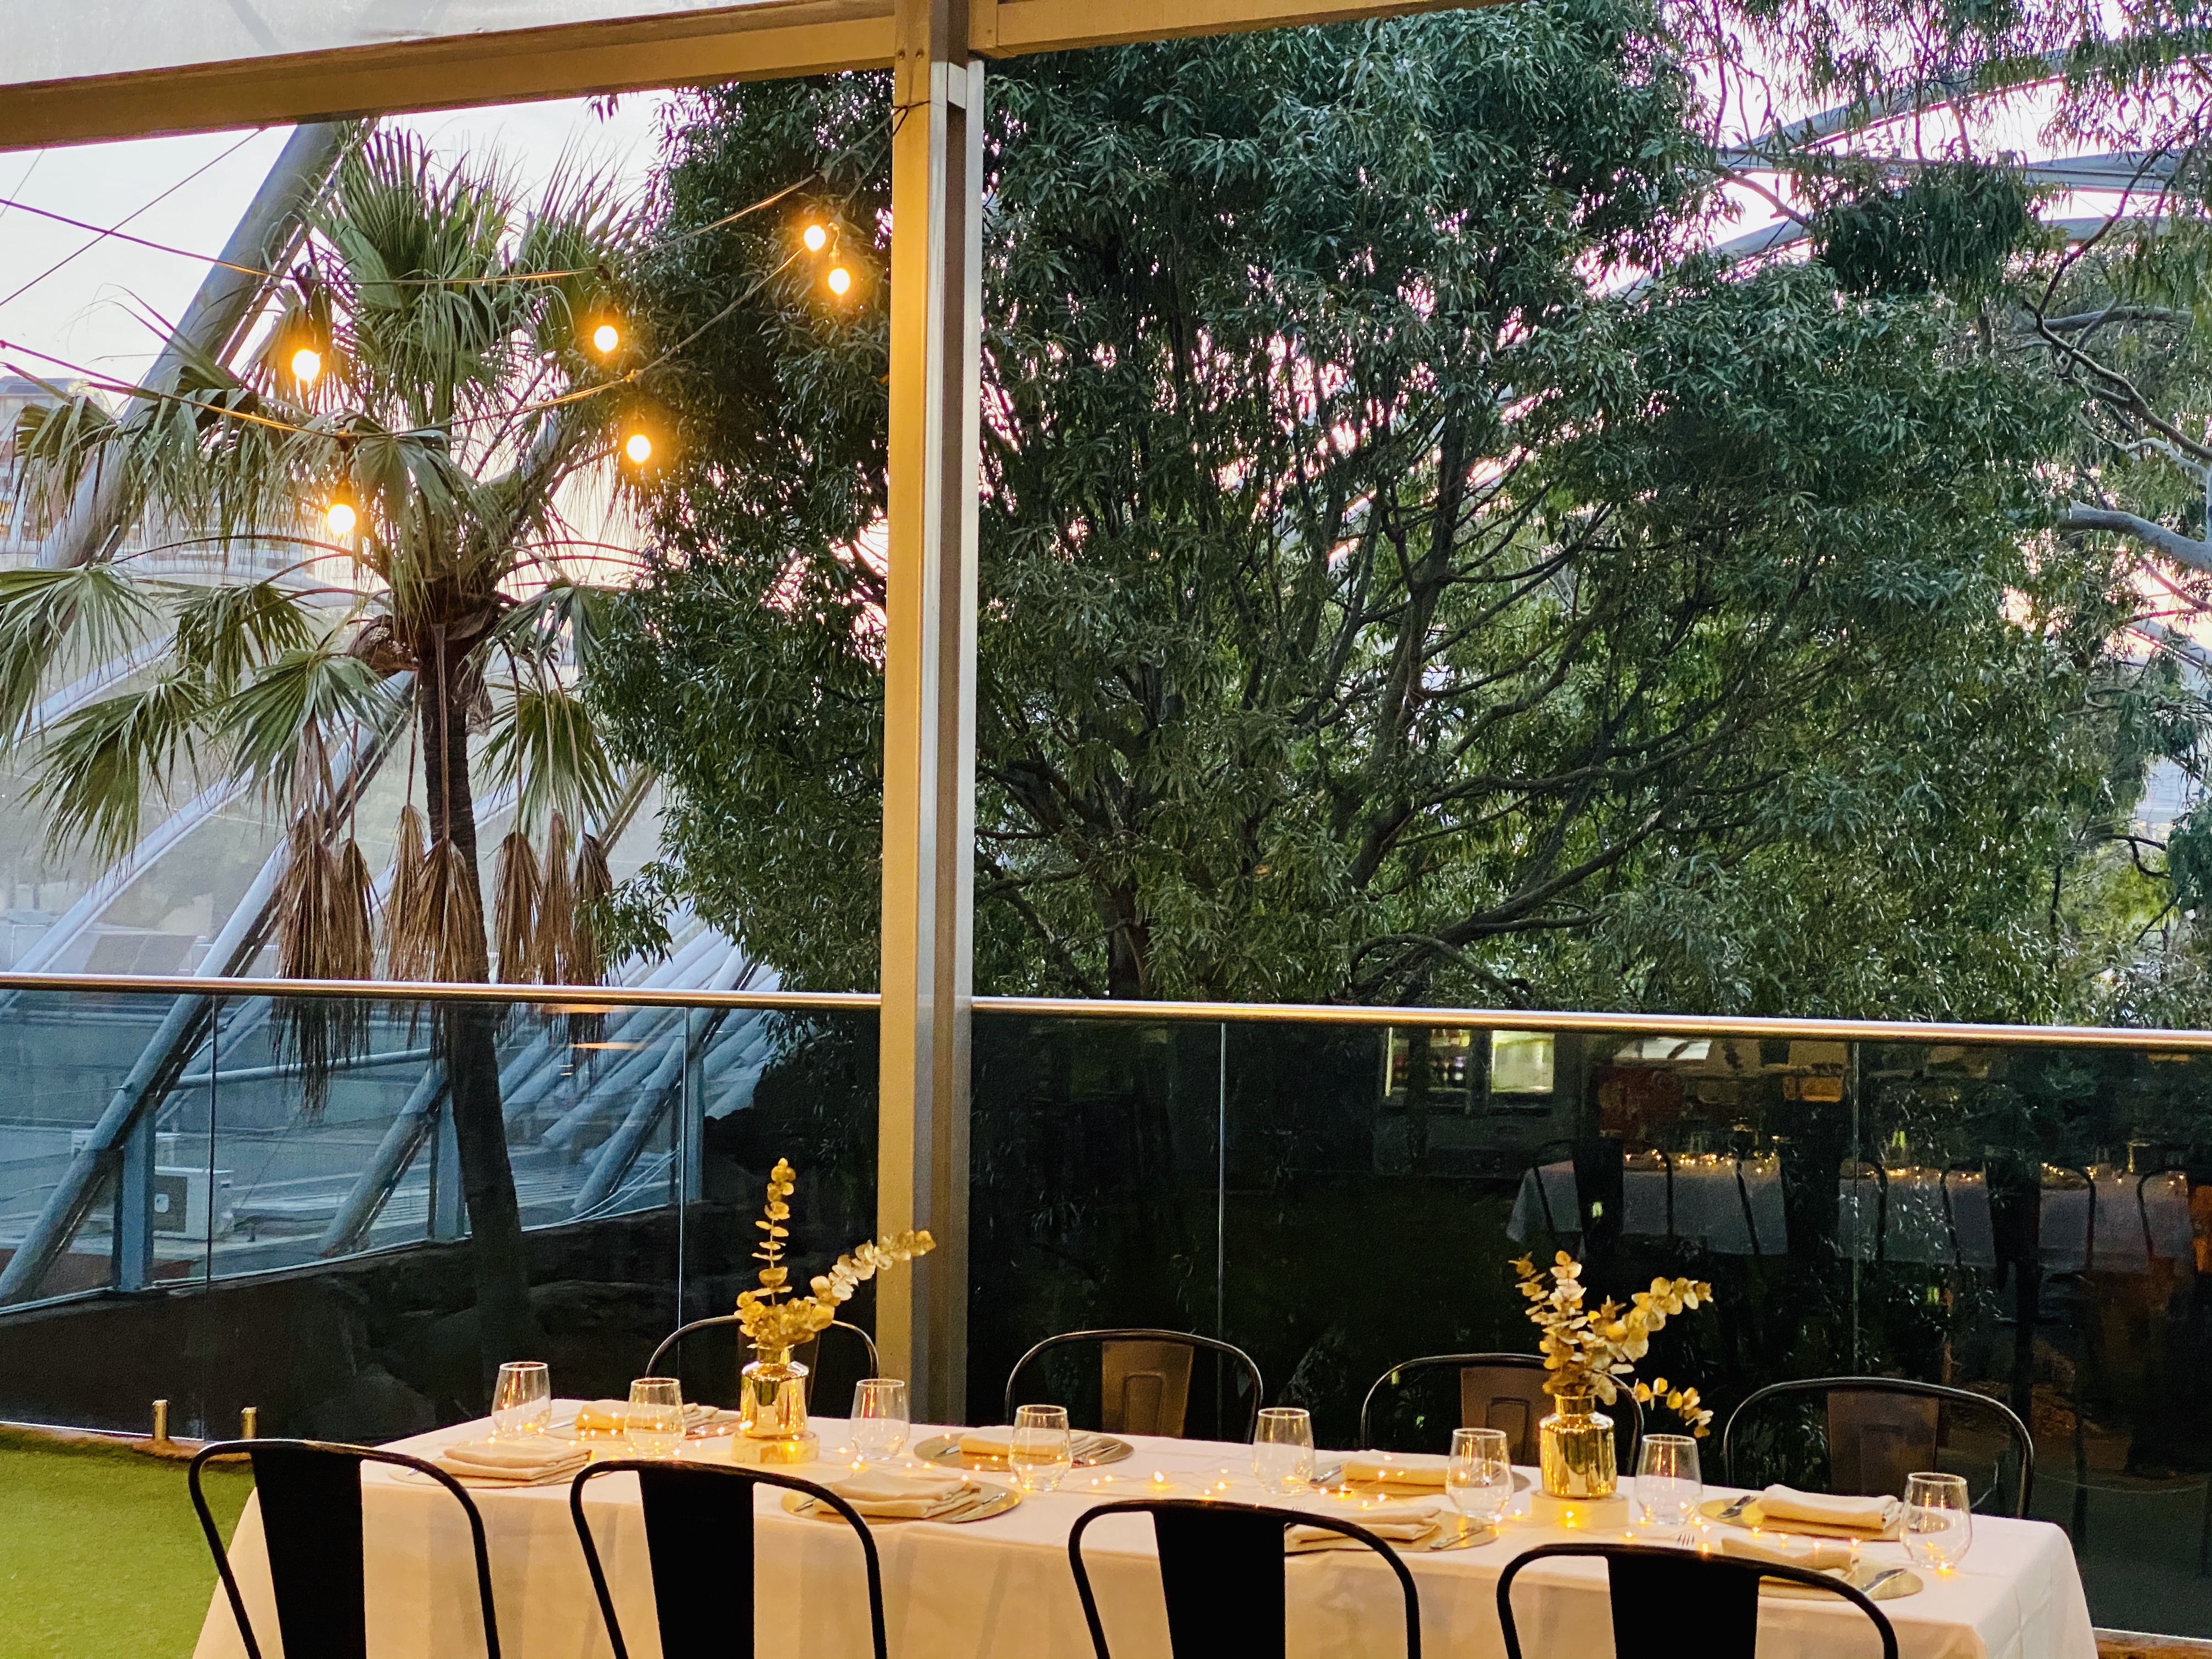 WILD LIFE Sydney Zoo Private Dining On The Koala Rooftop 5